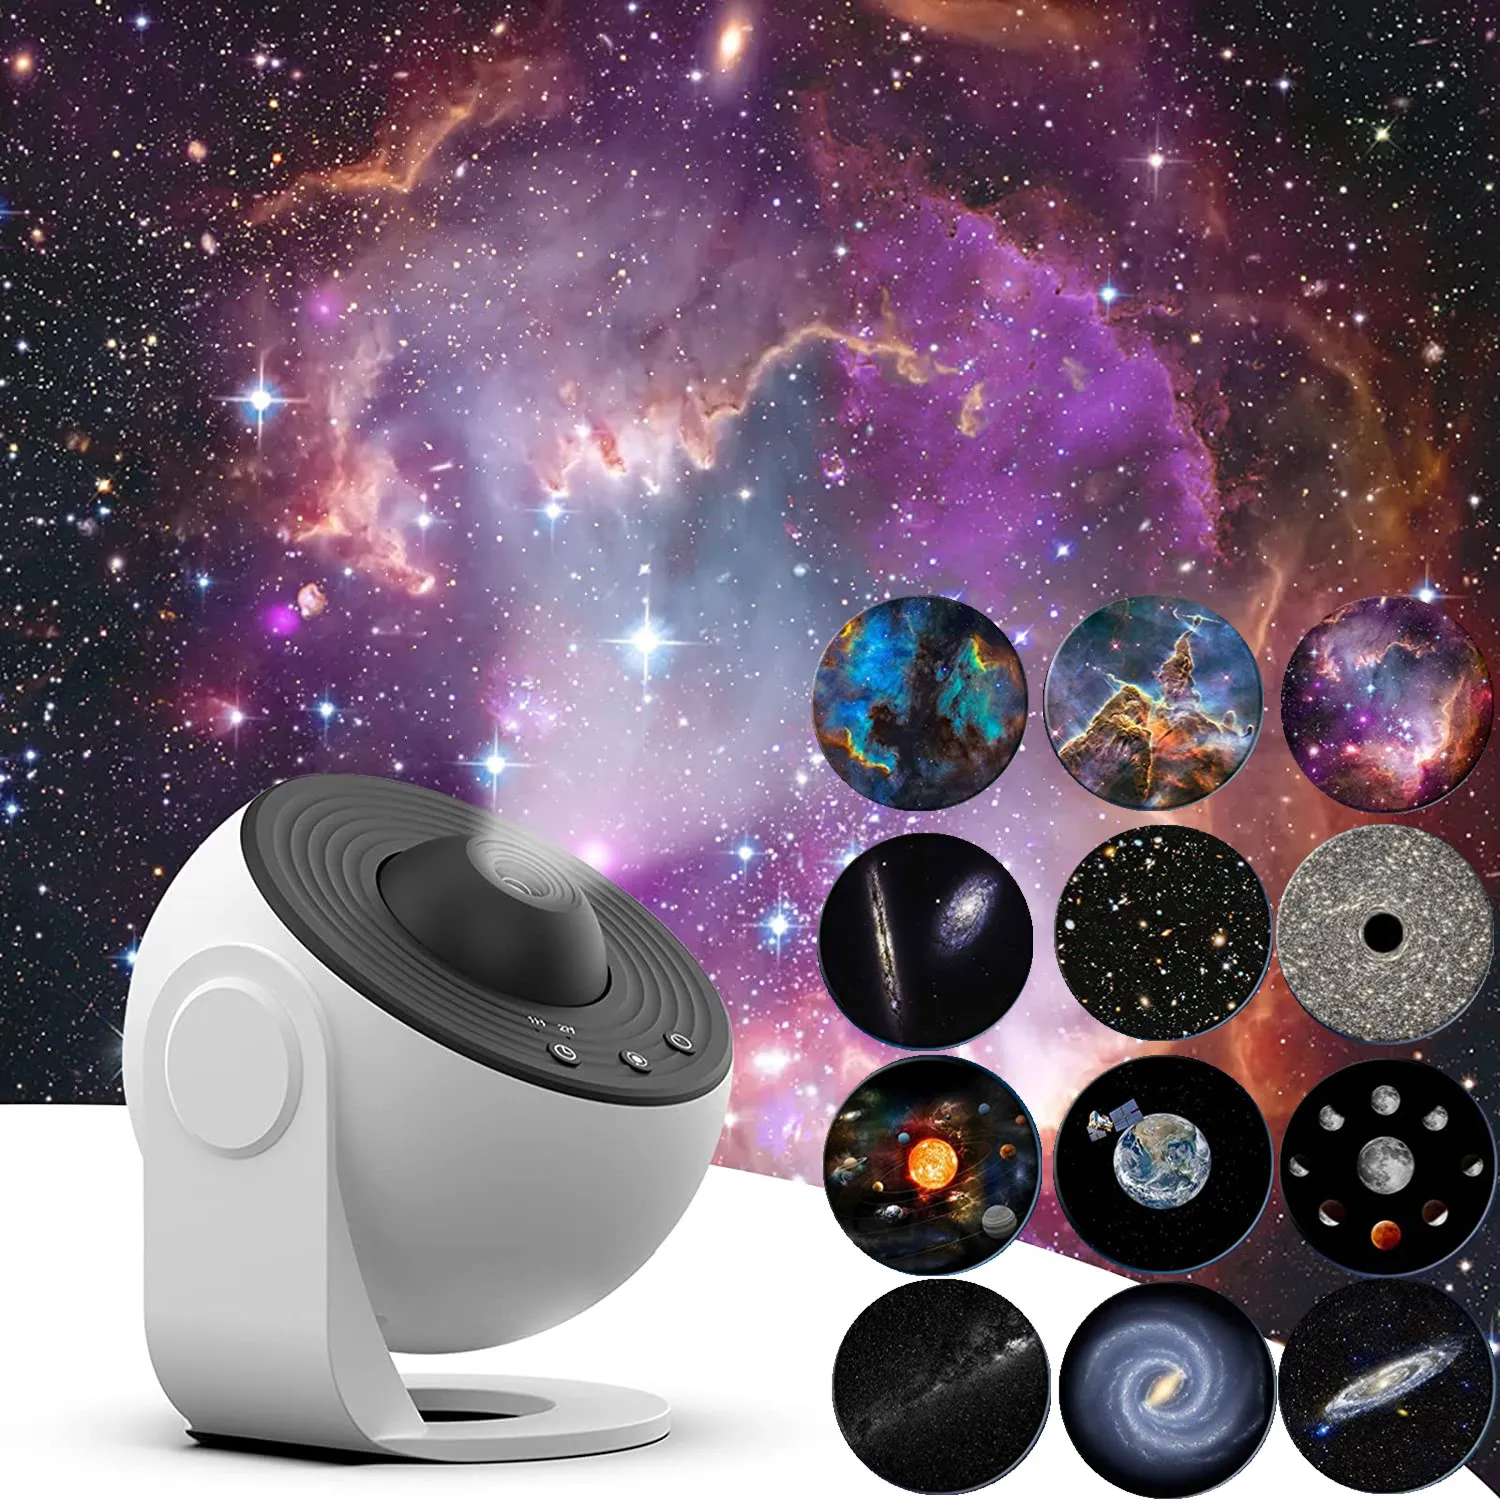 12 IN 1 Galaxy Star Projector LED Night Light Planetarium Starry Sky Projector Lamp for Bedroom Ceiling Room Decor Kids Gifts